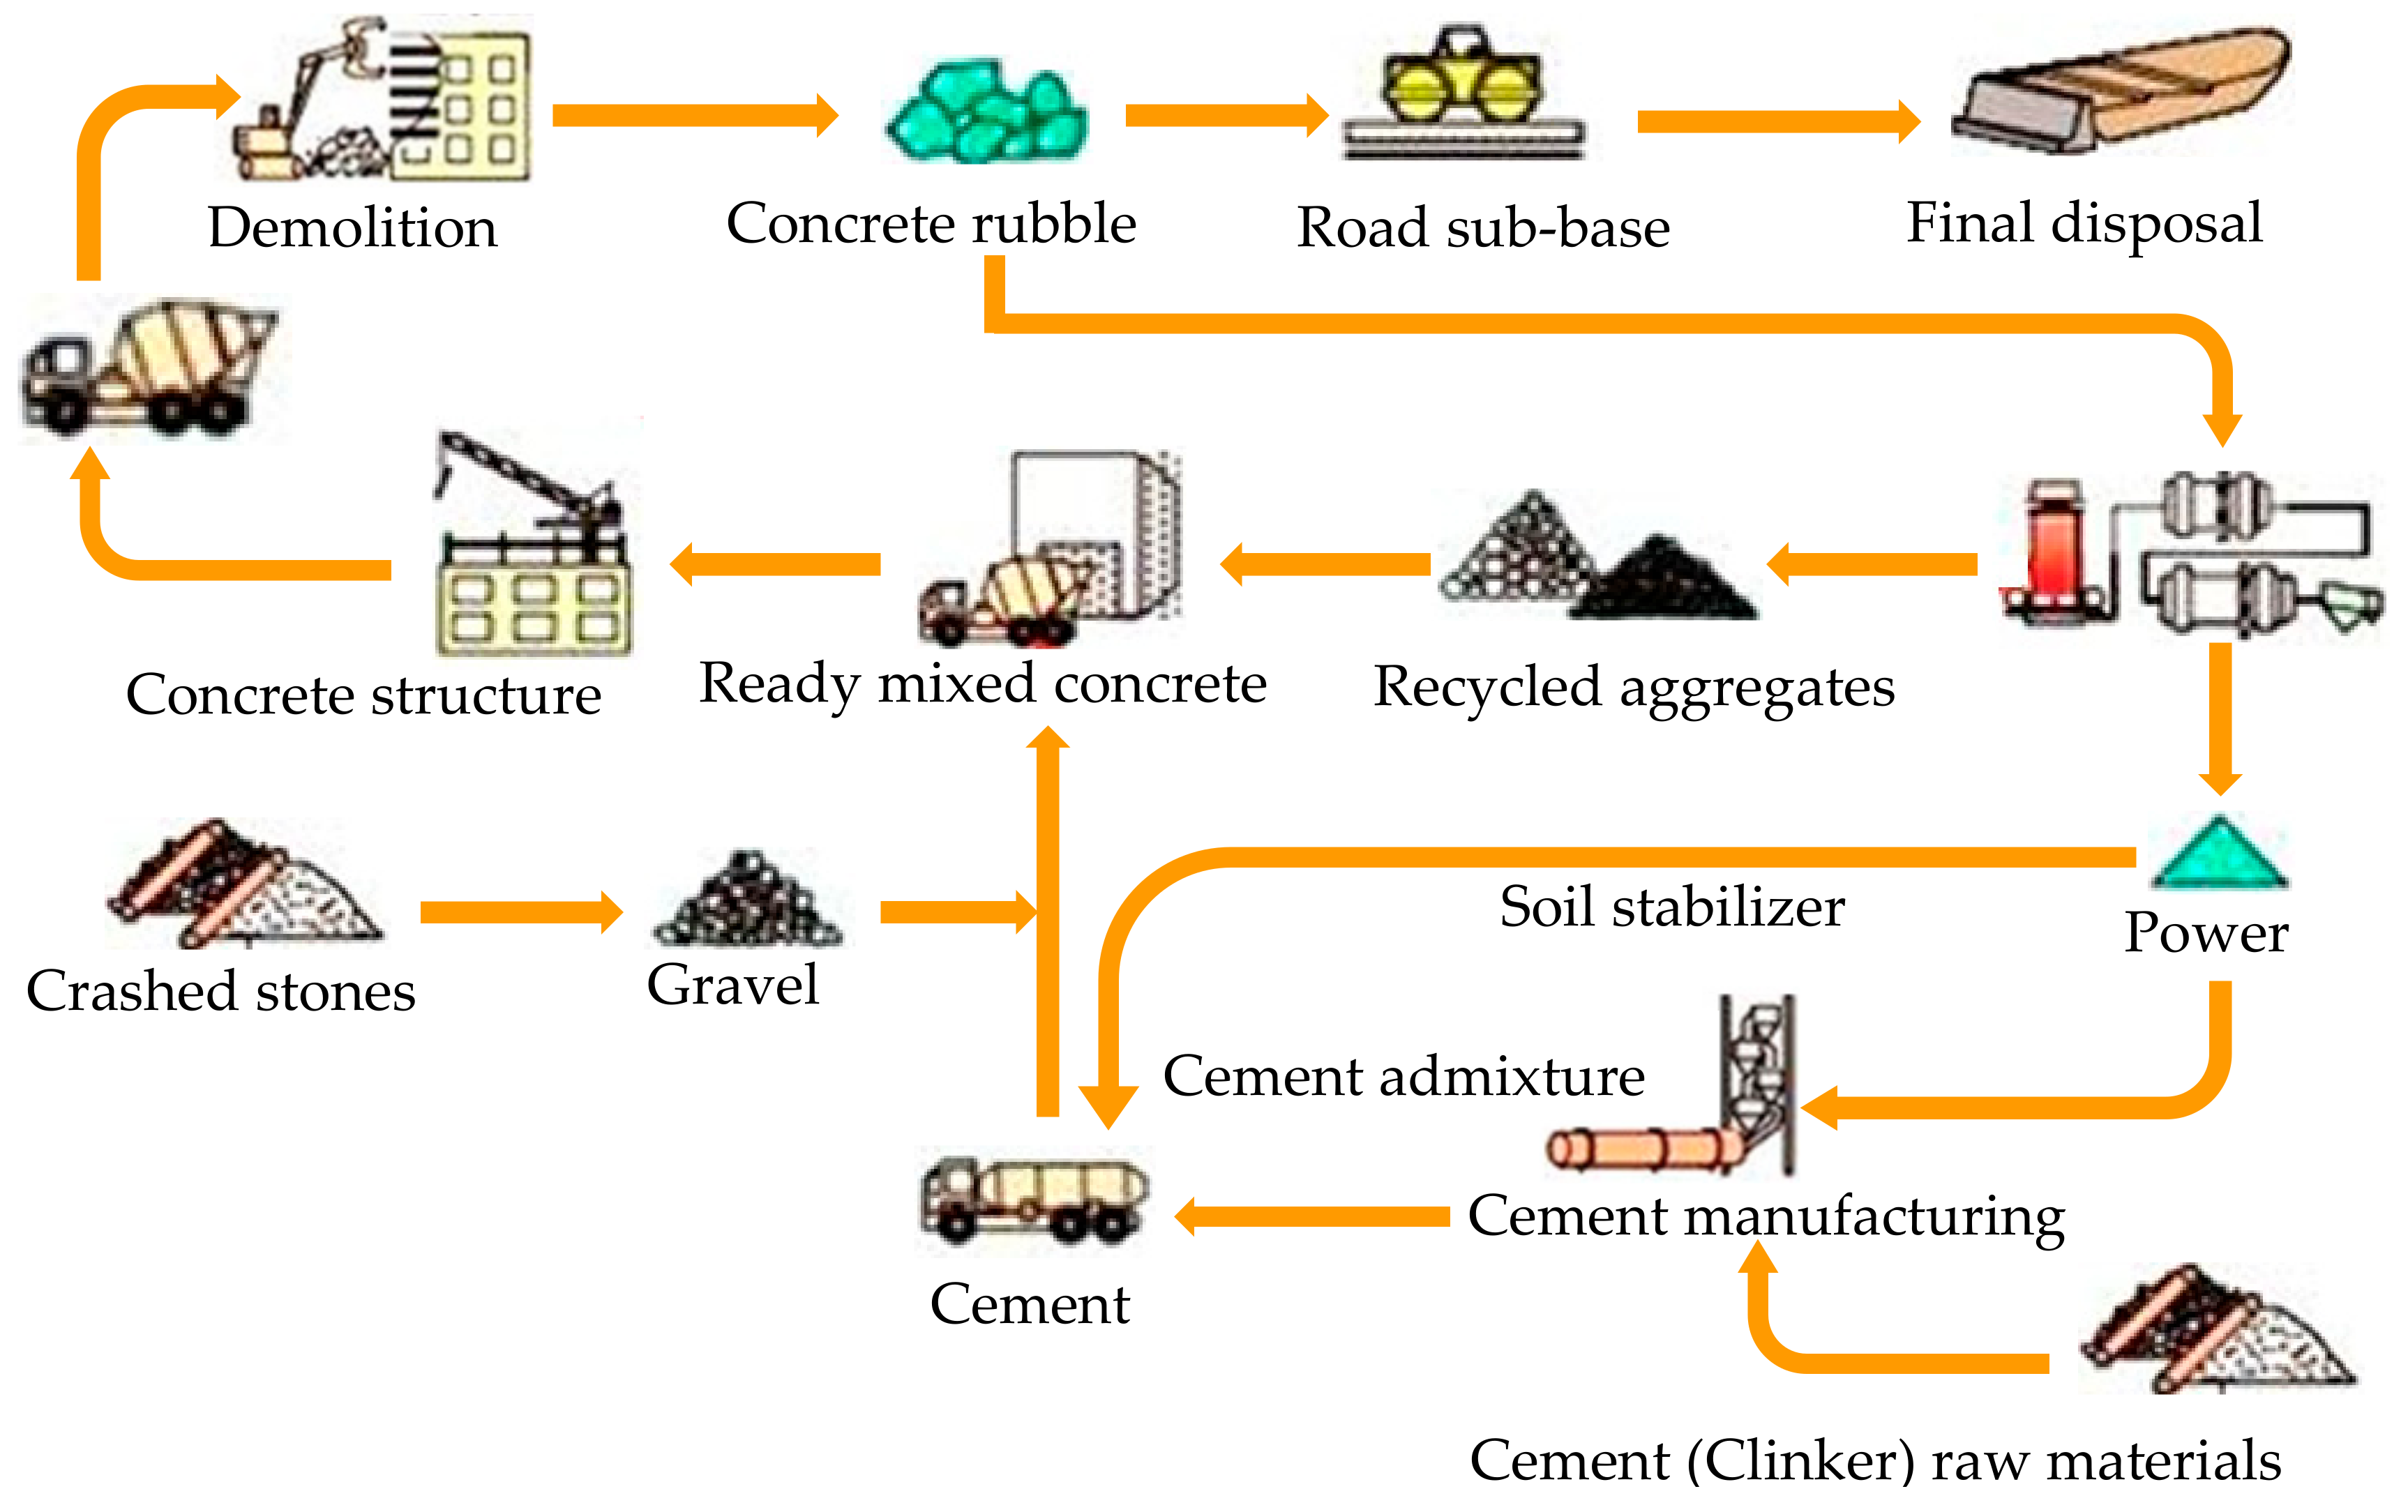 Application of recycled aggregate porous concrete pile (RAPP) to